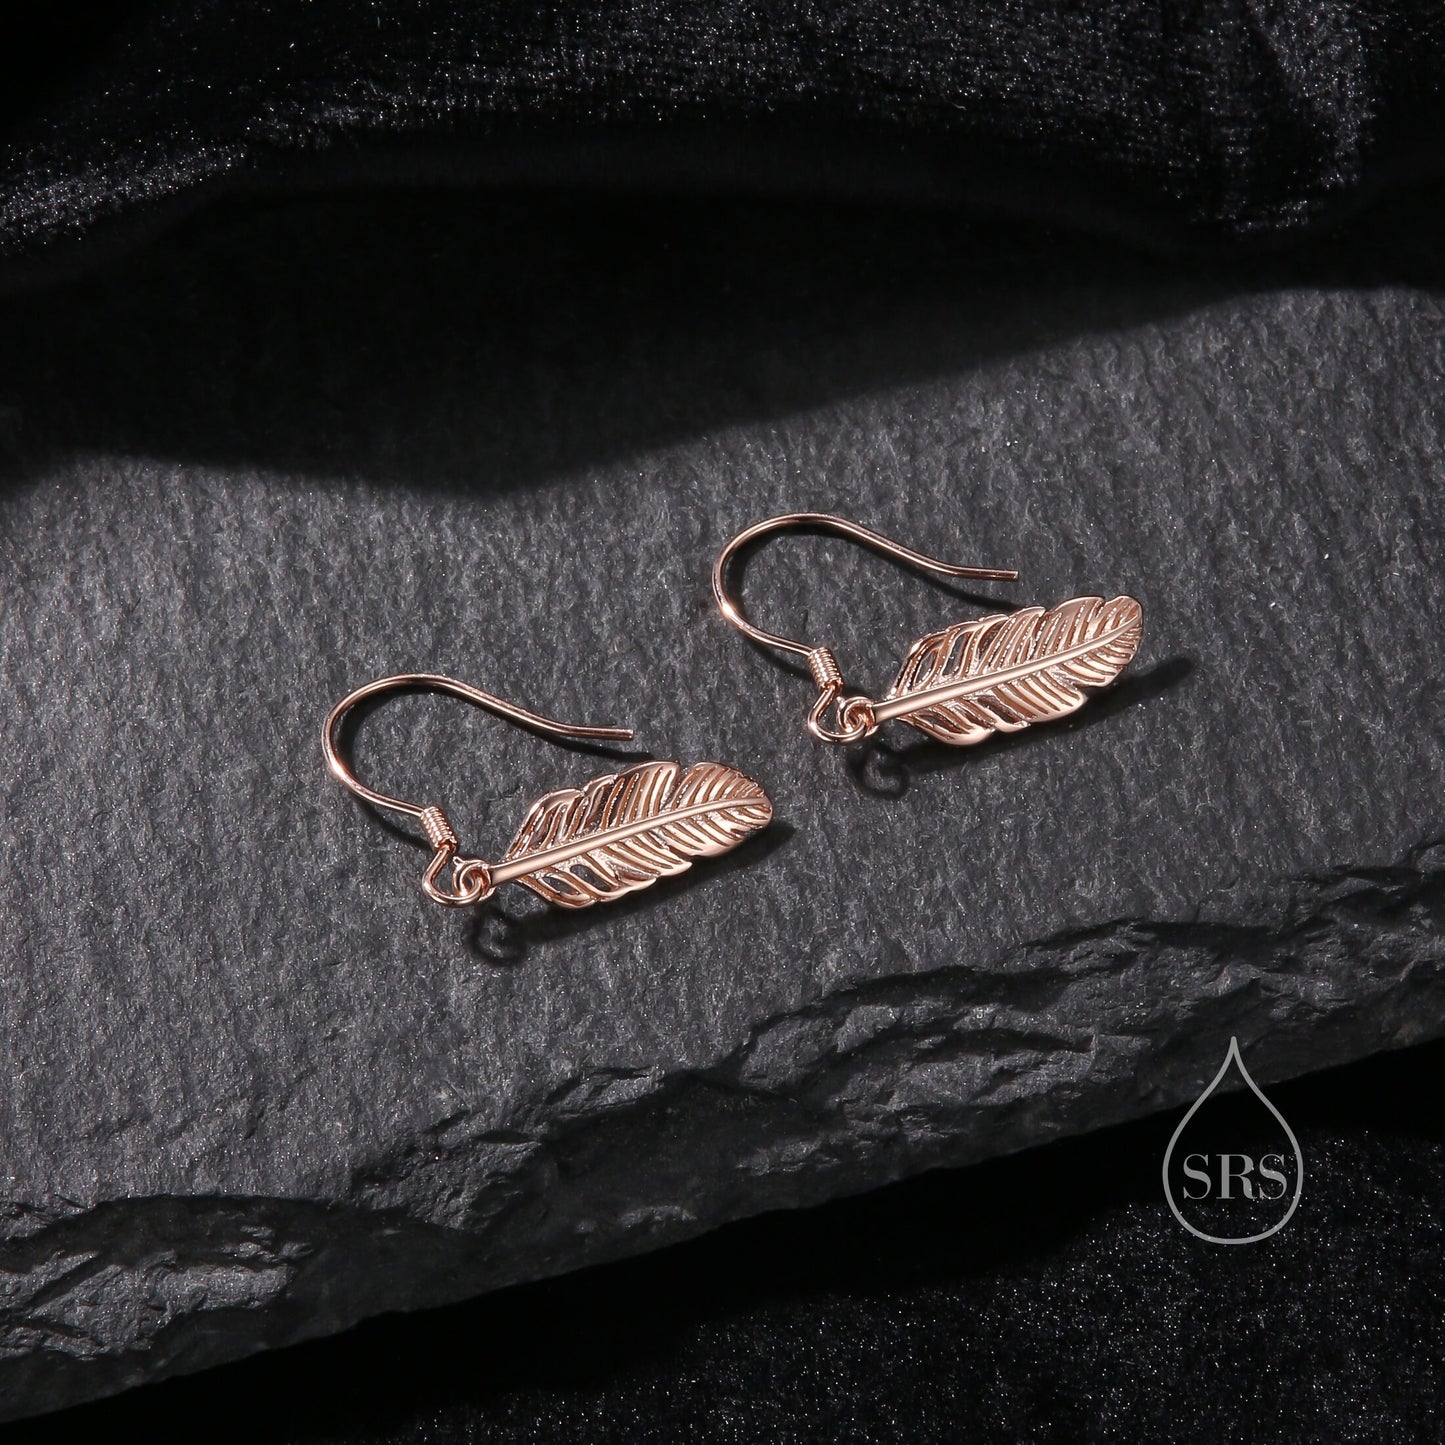 Sterling Silver Feather Drop Hook Earrings, Silver or Gold or Rose Gold, Delicate Feather Dangle Earrings,  Nature Inspired